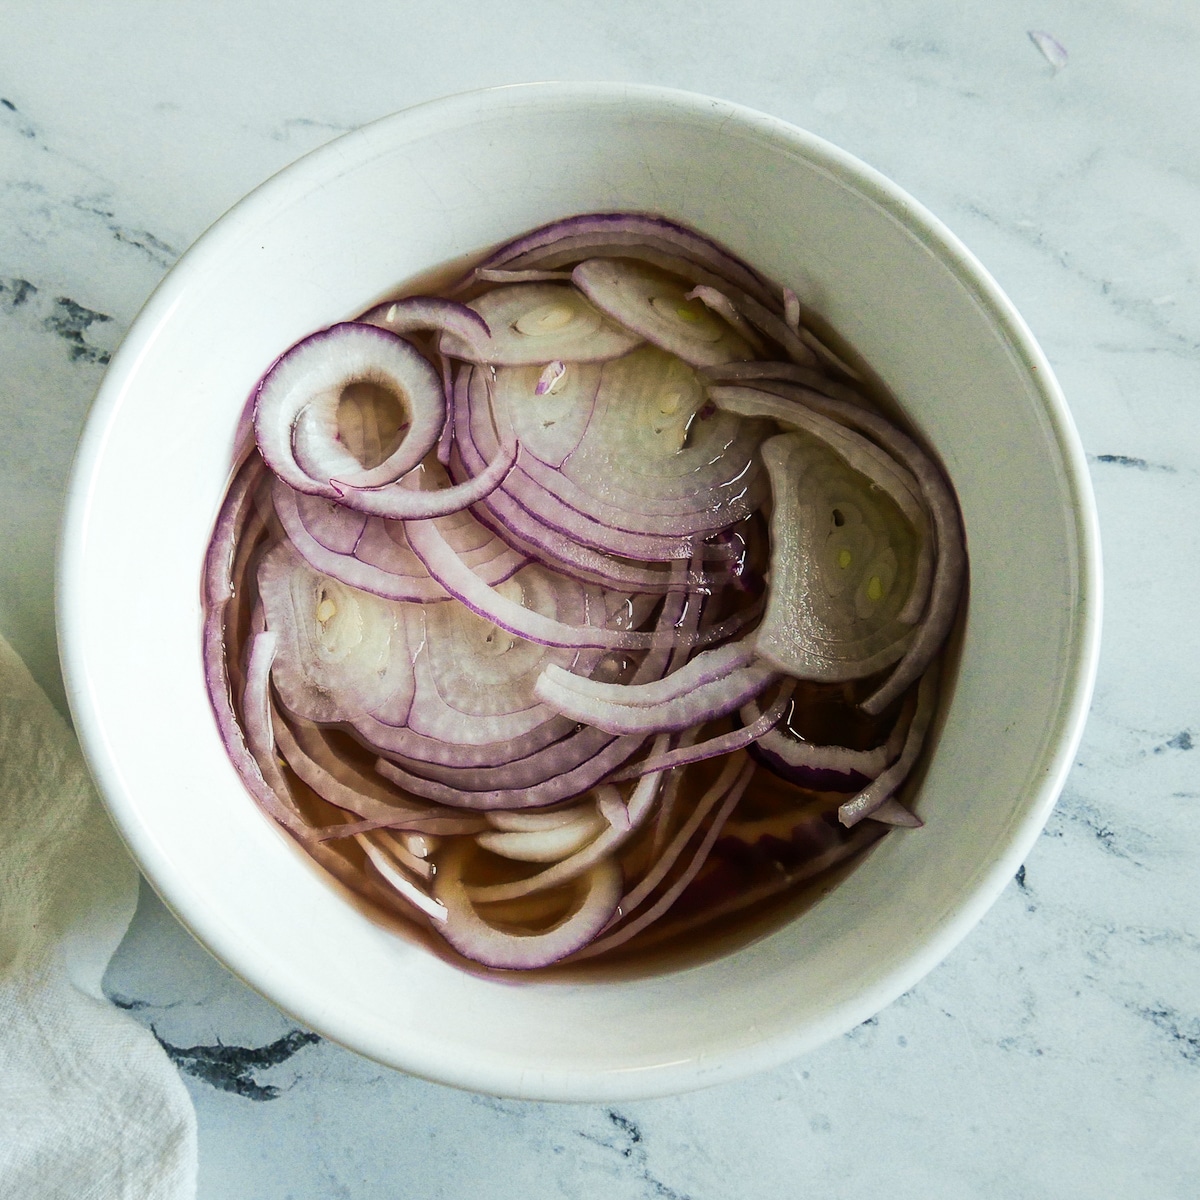 Sliced red onion resting in pickling liquid.